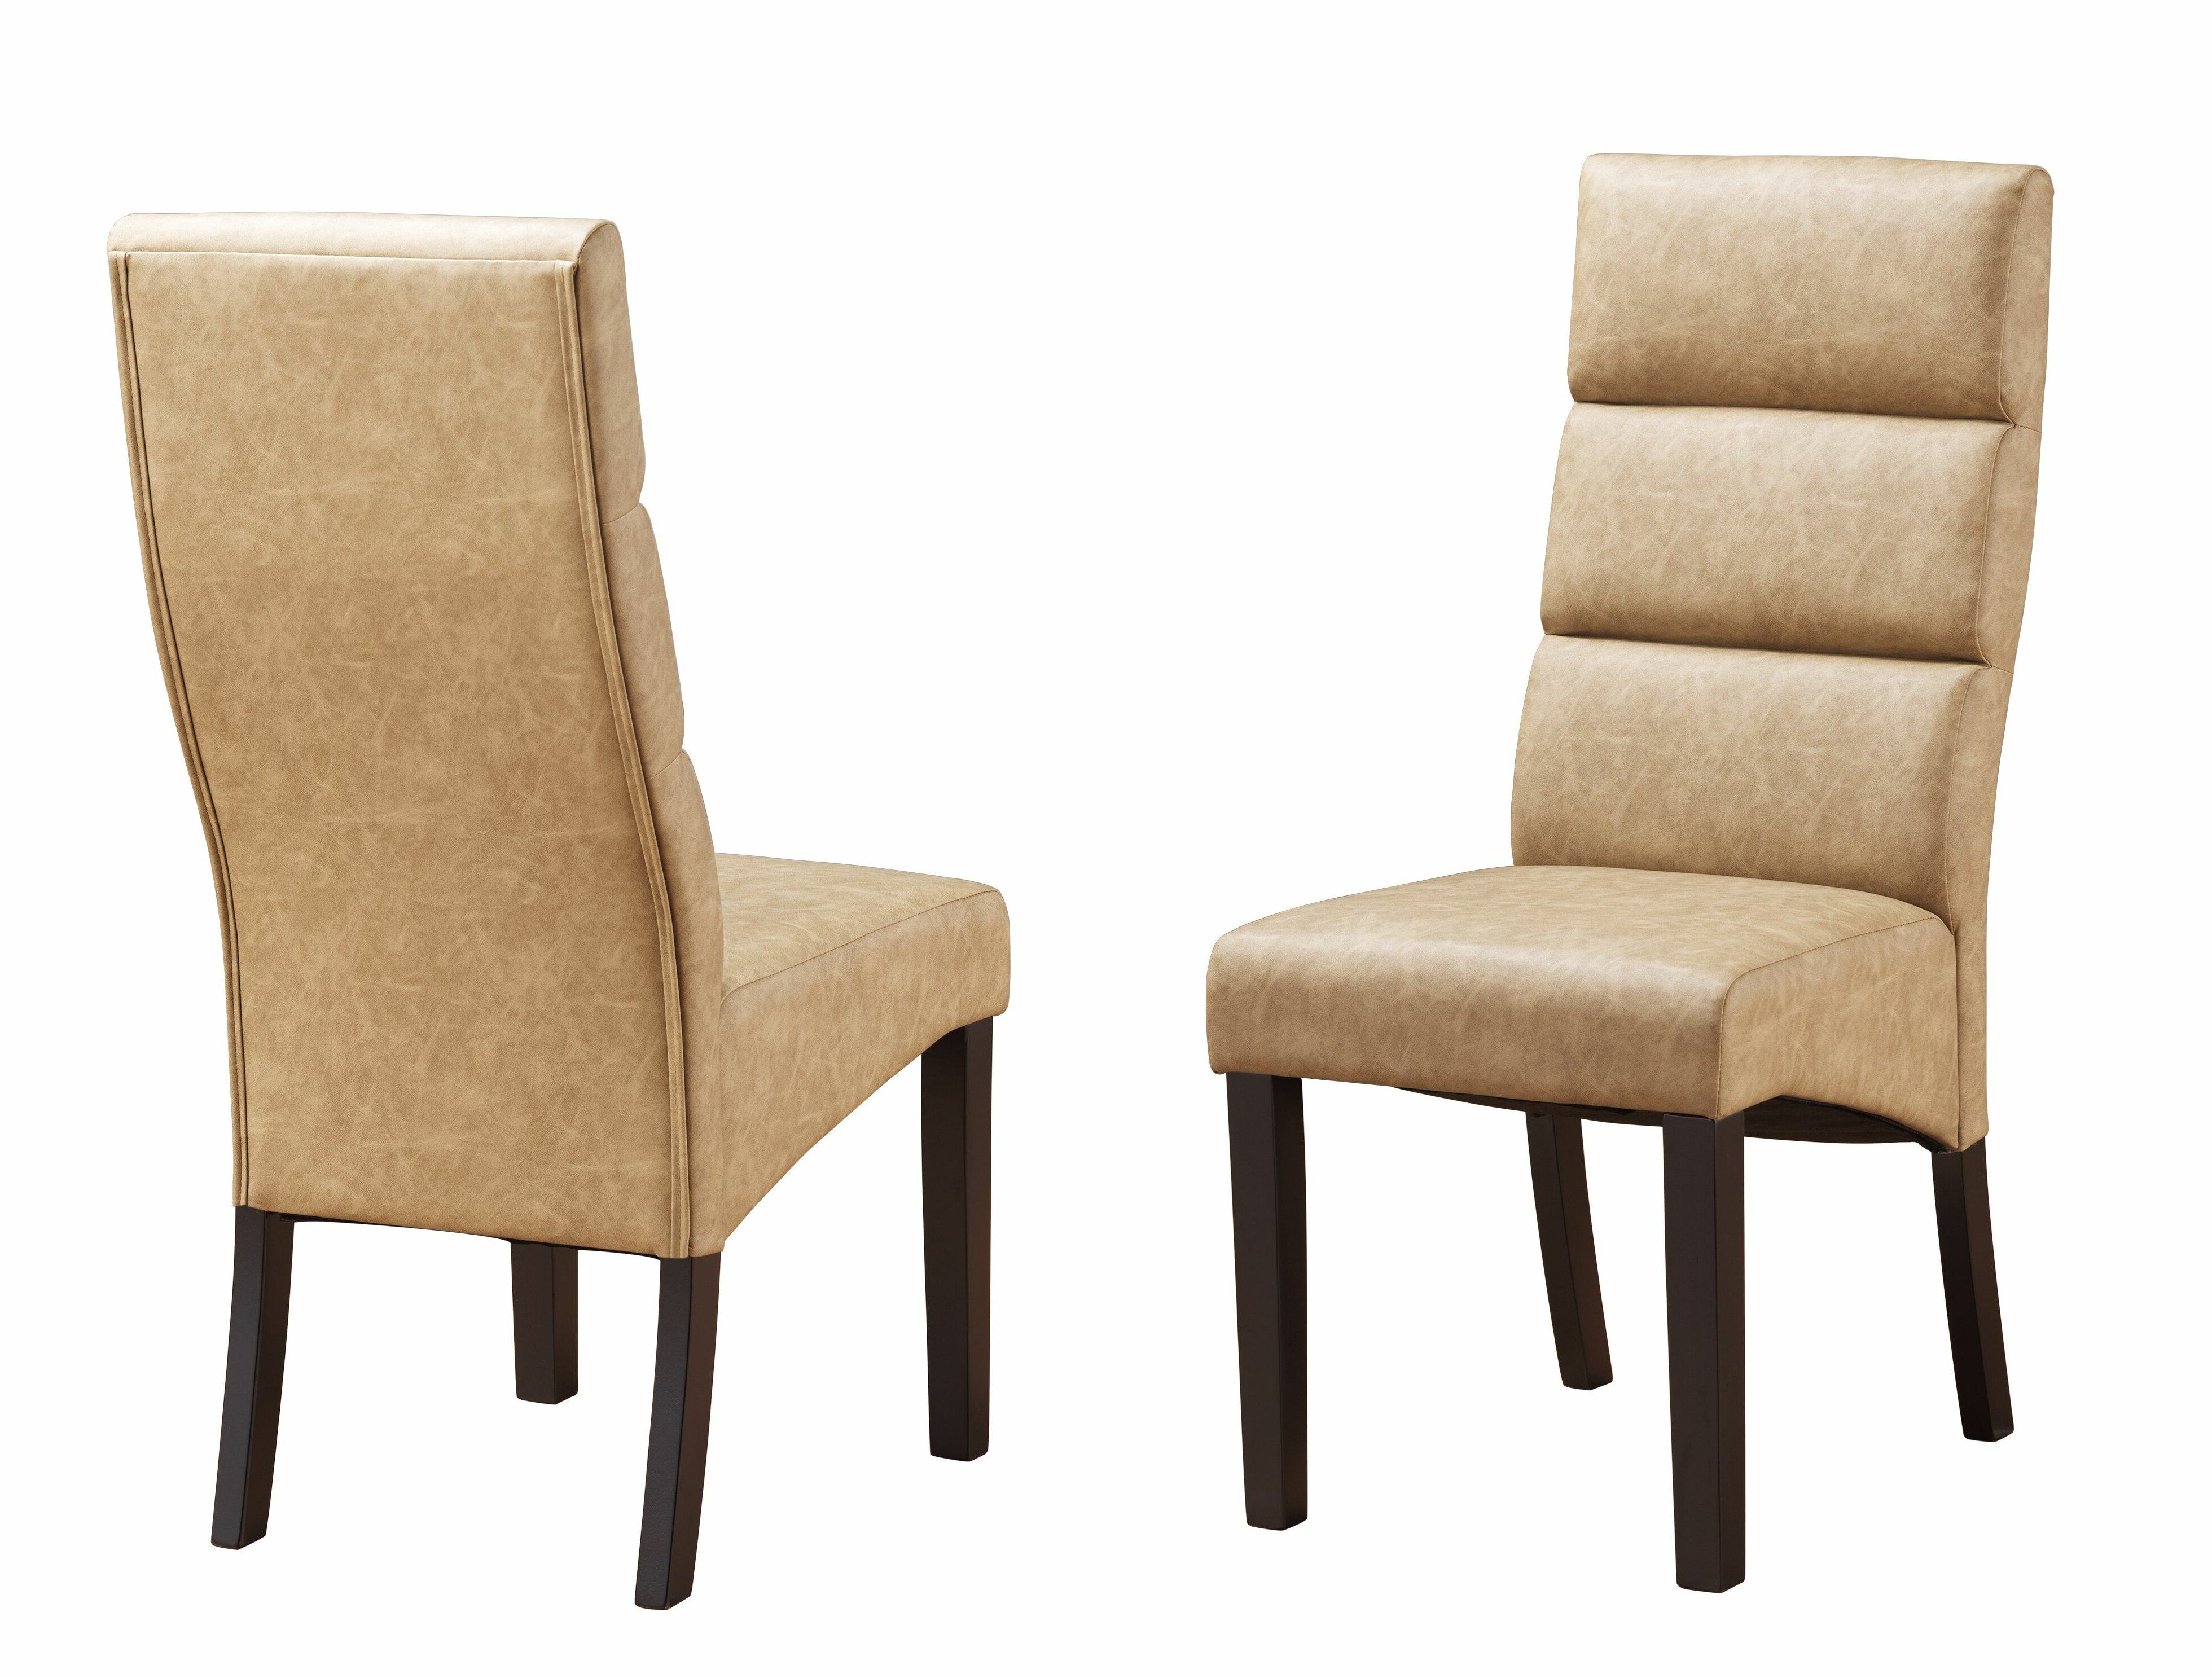 Famous Teixeira Upholstered Dining Chair Intended For Reinert 5 Piece Dining Sets (View 15 of 20)